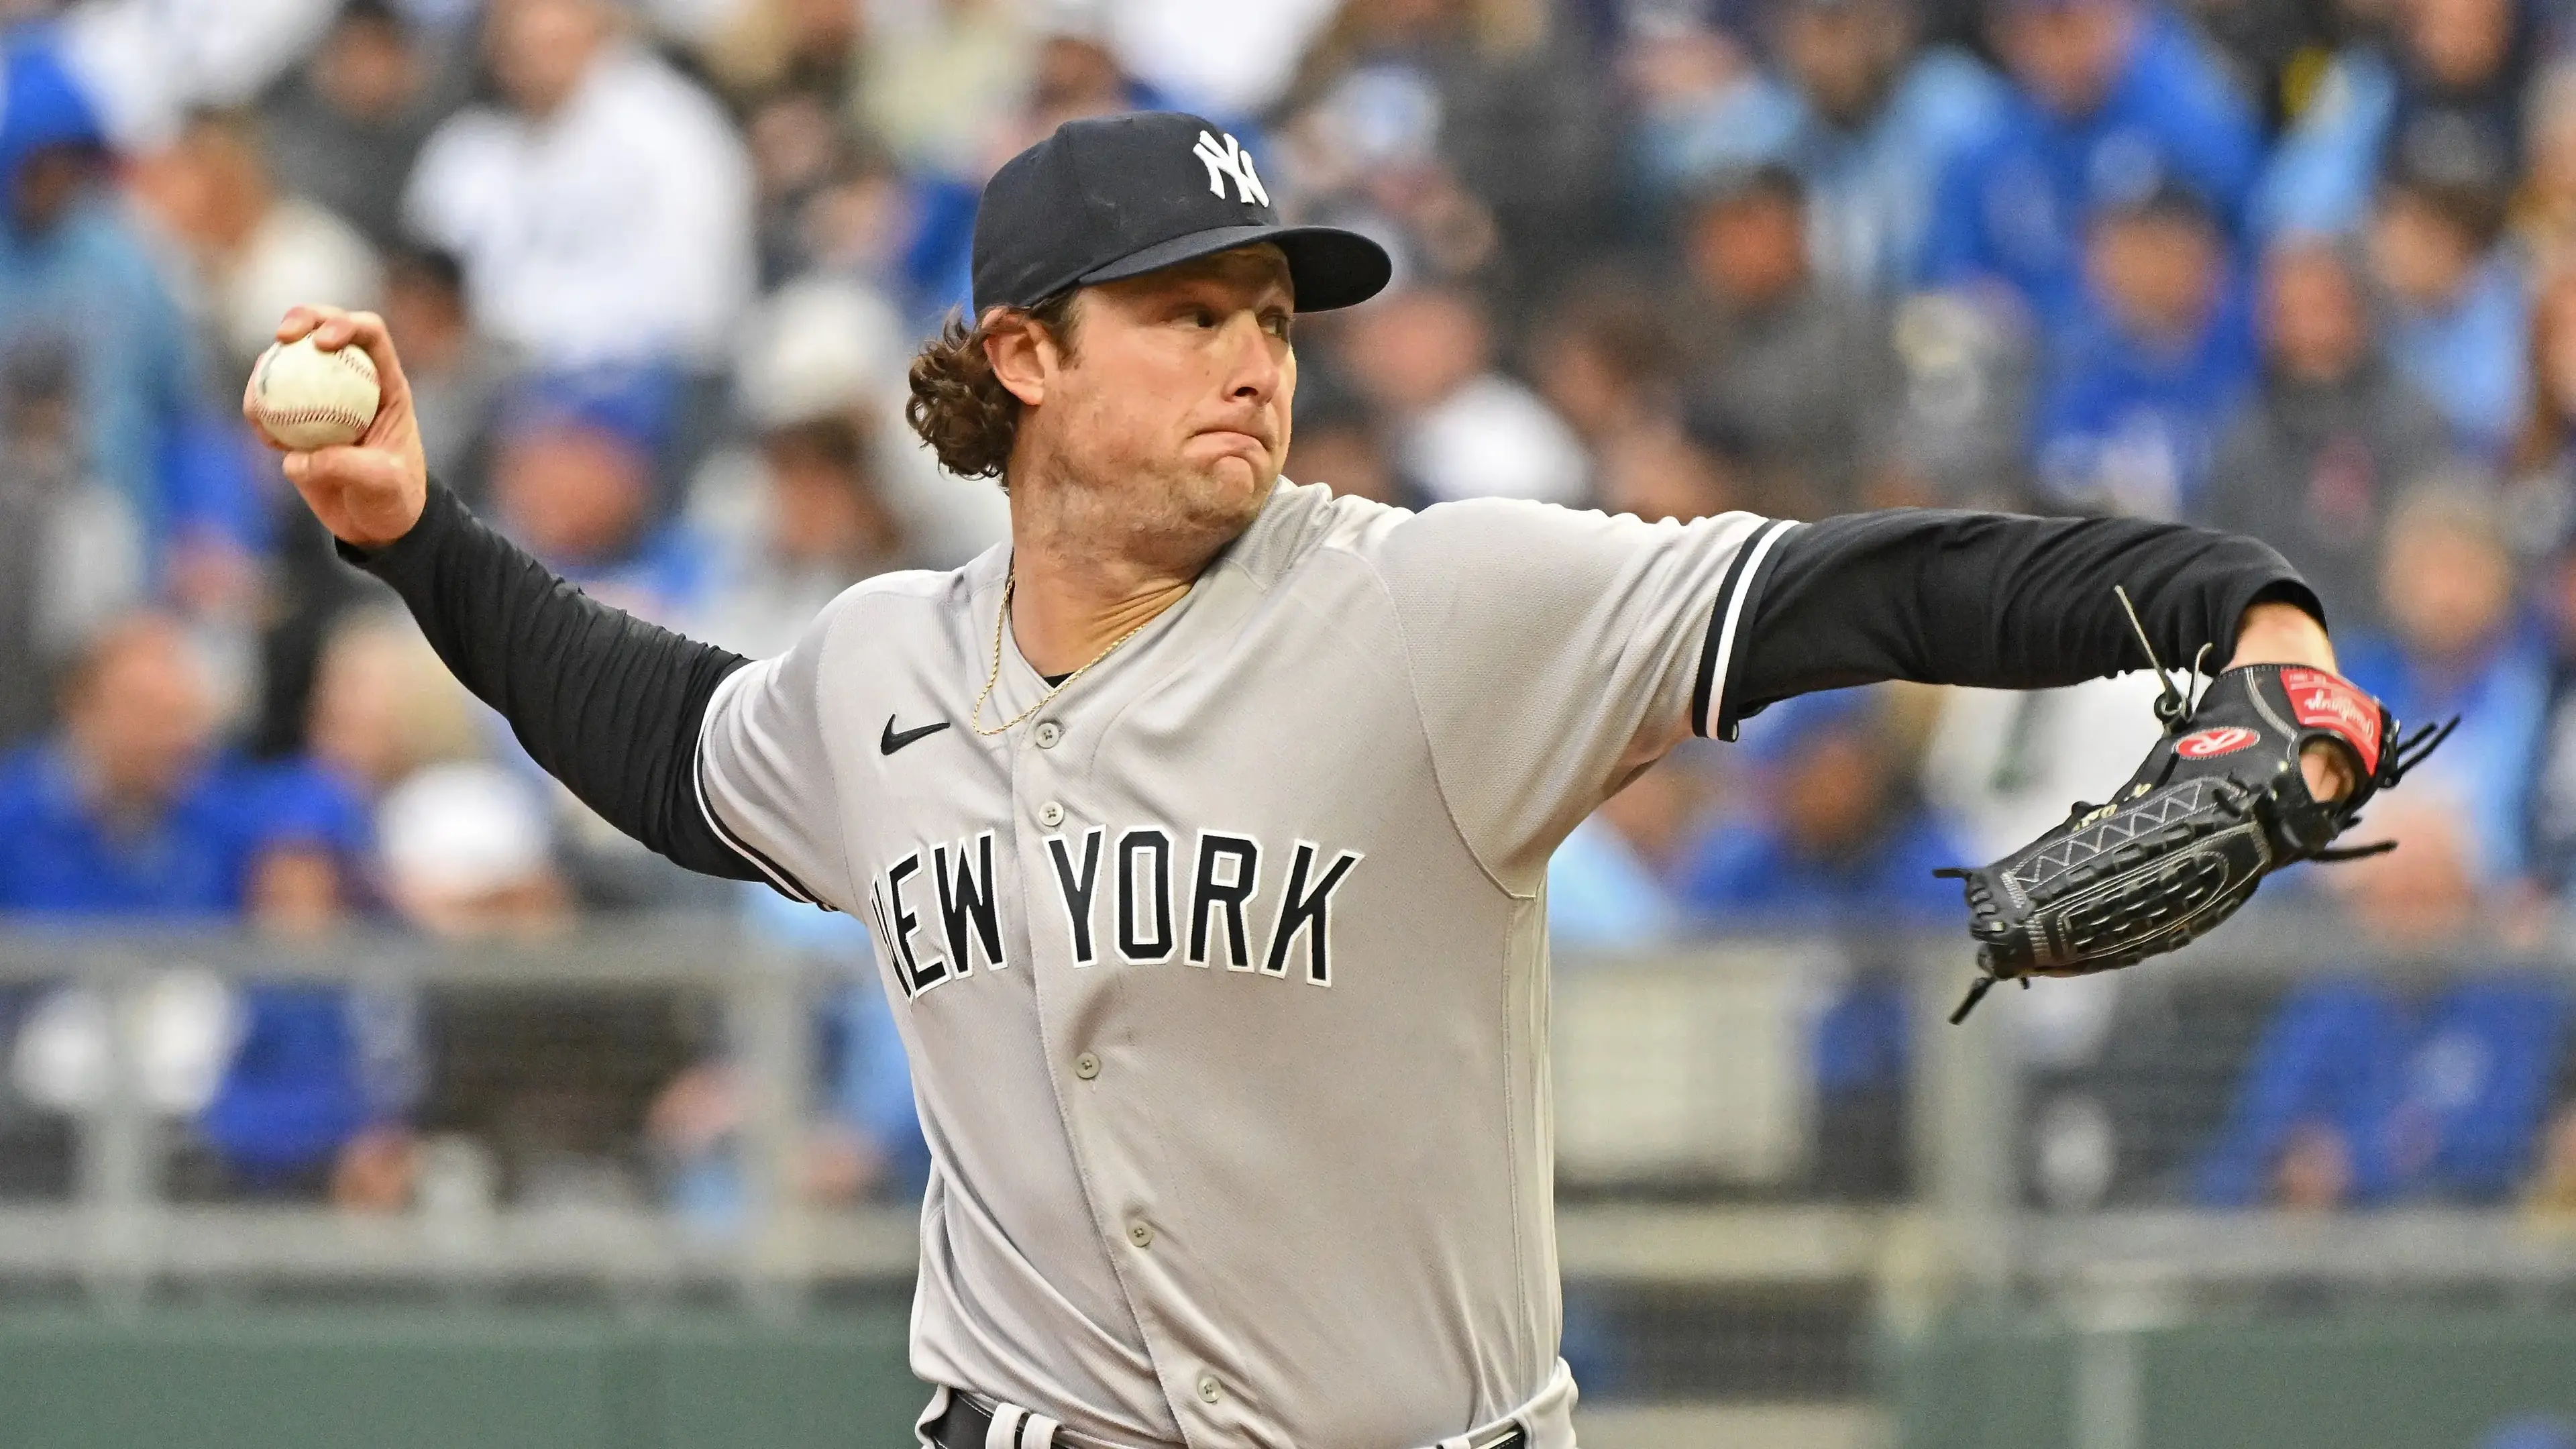 Apr 30, 2022; Kansas City, Missouri, USA; New York Yankees starting pitcher Gerrit Cole (45) delivers a pitch during the first inning against the Kansas City Royals at Kauffman Stadium. Mandatory Credit: Peter Aiken-USA TODAY Sports / Peter Aiken-USA TODAY Sports